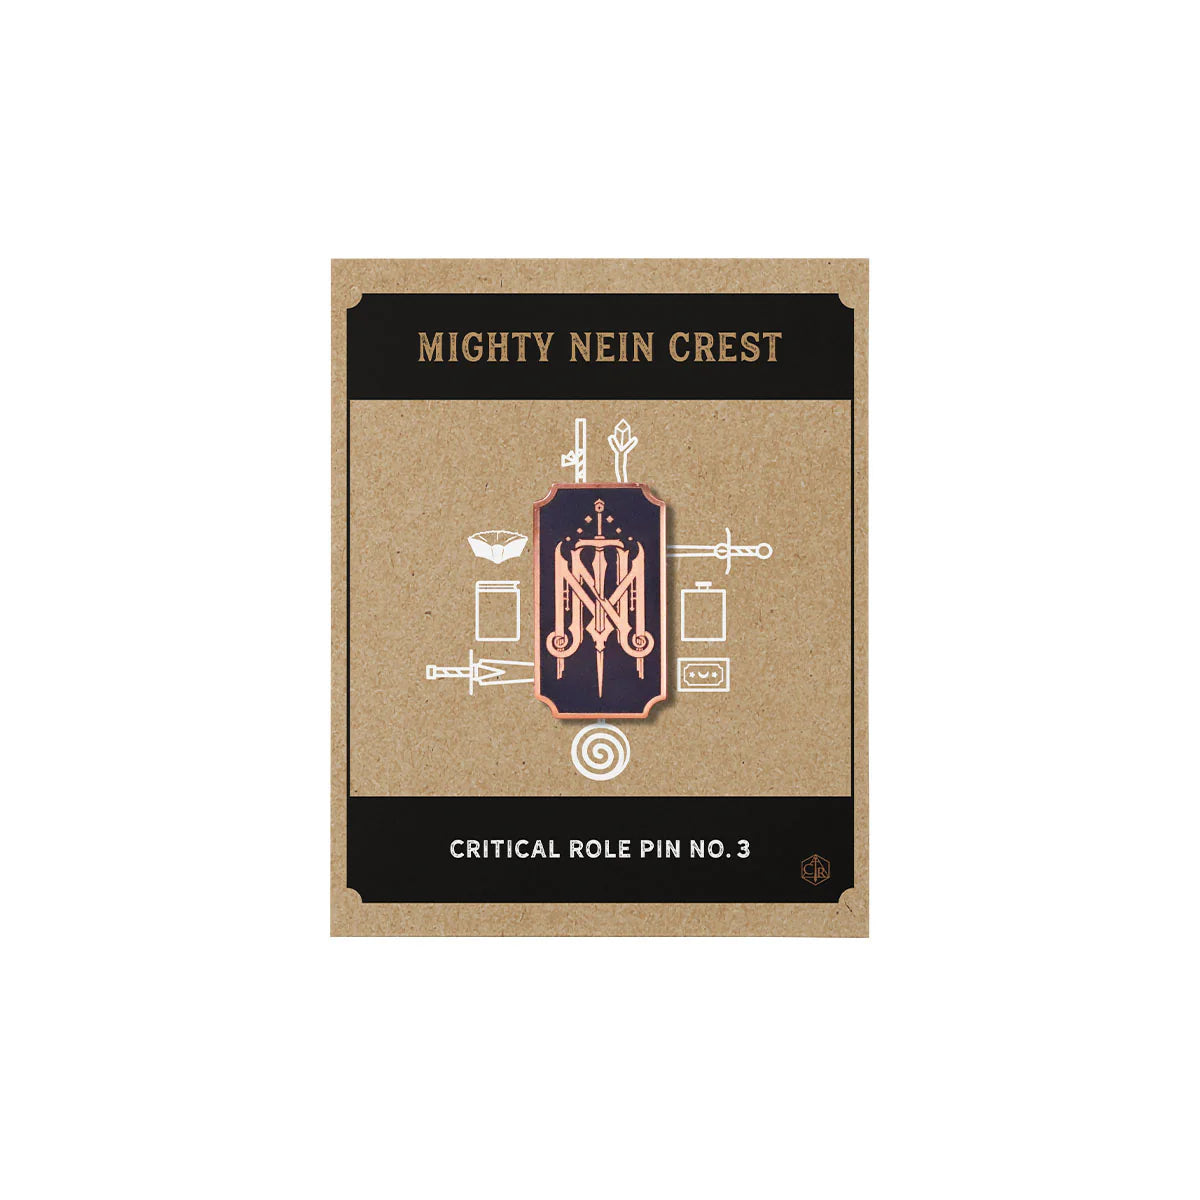 Critical Role Pin No. 3 - Mighty Nein Crest Pin